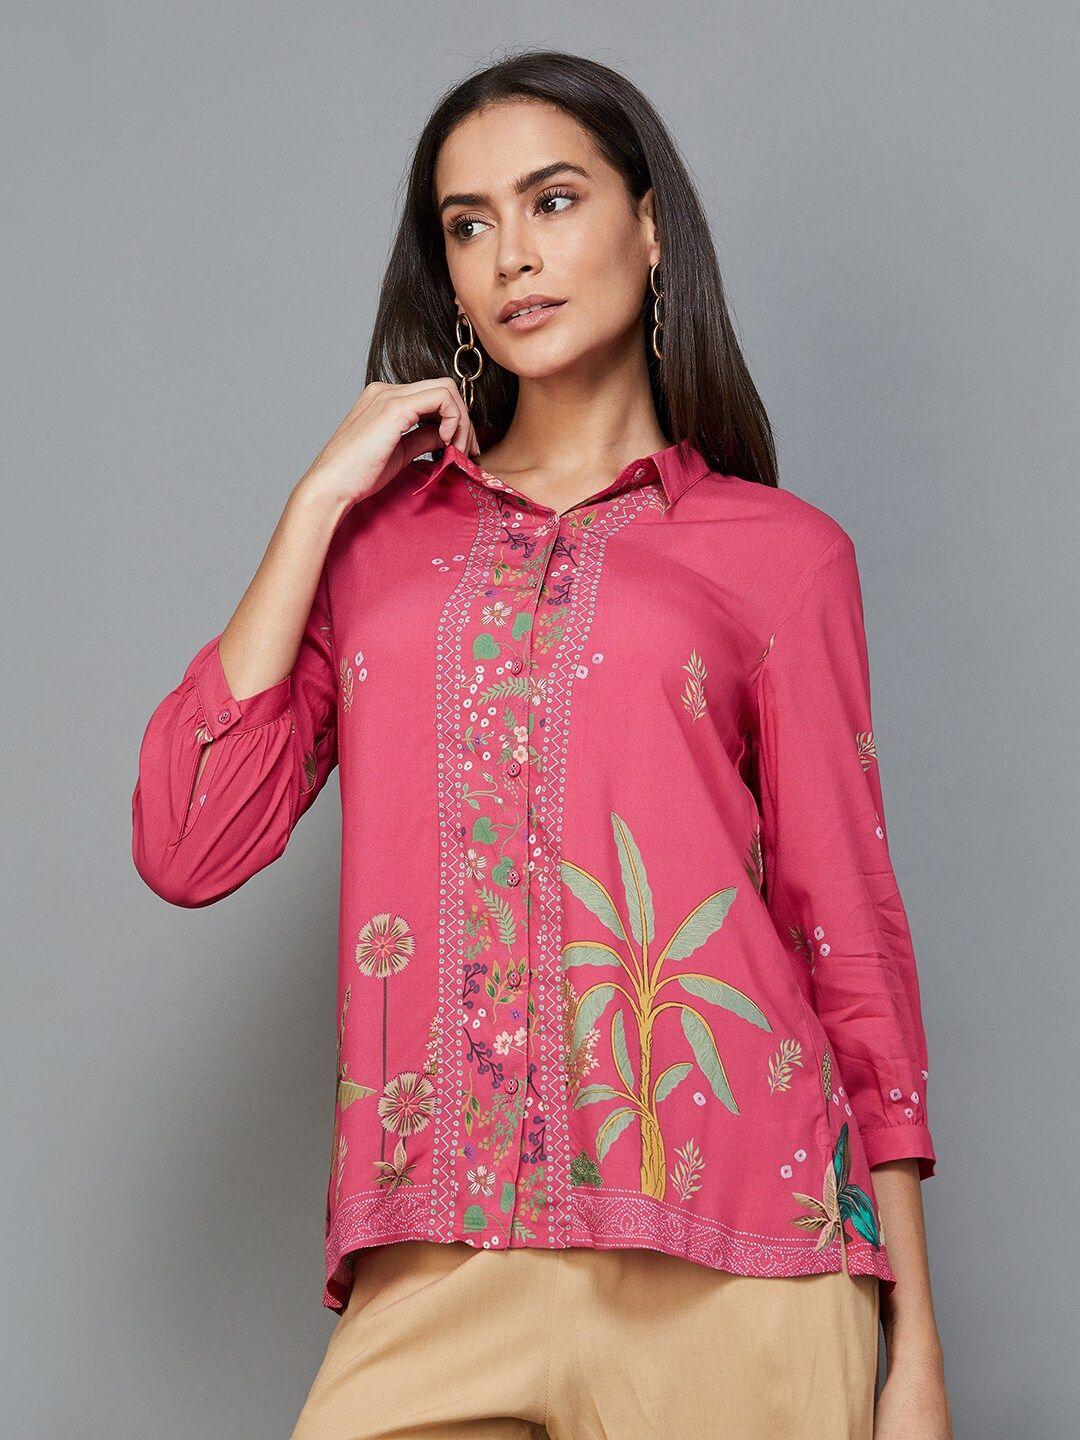 melange by lifestyle floral printed shirt collar cuffed sleeve shirt style top